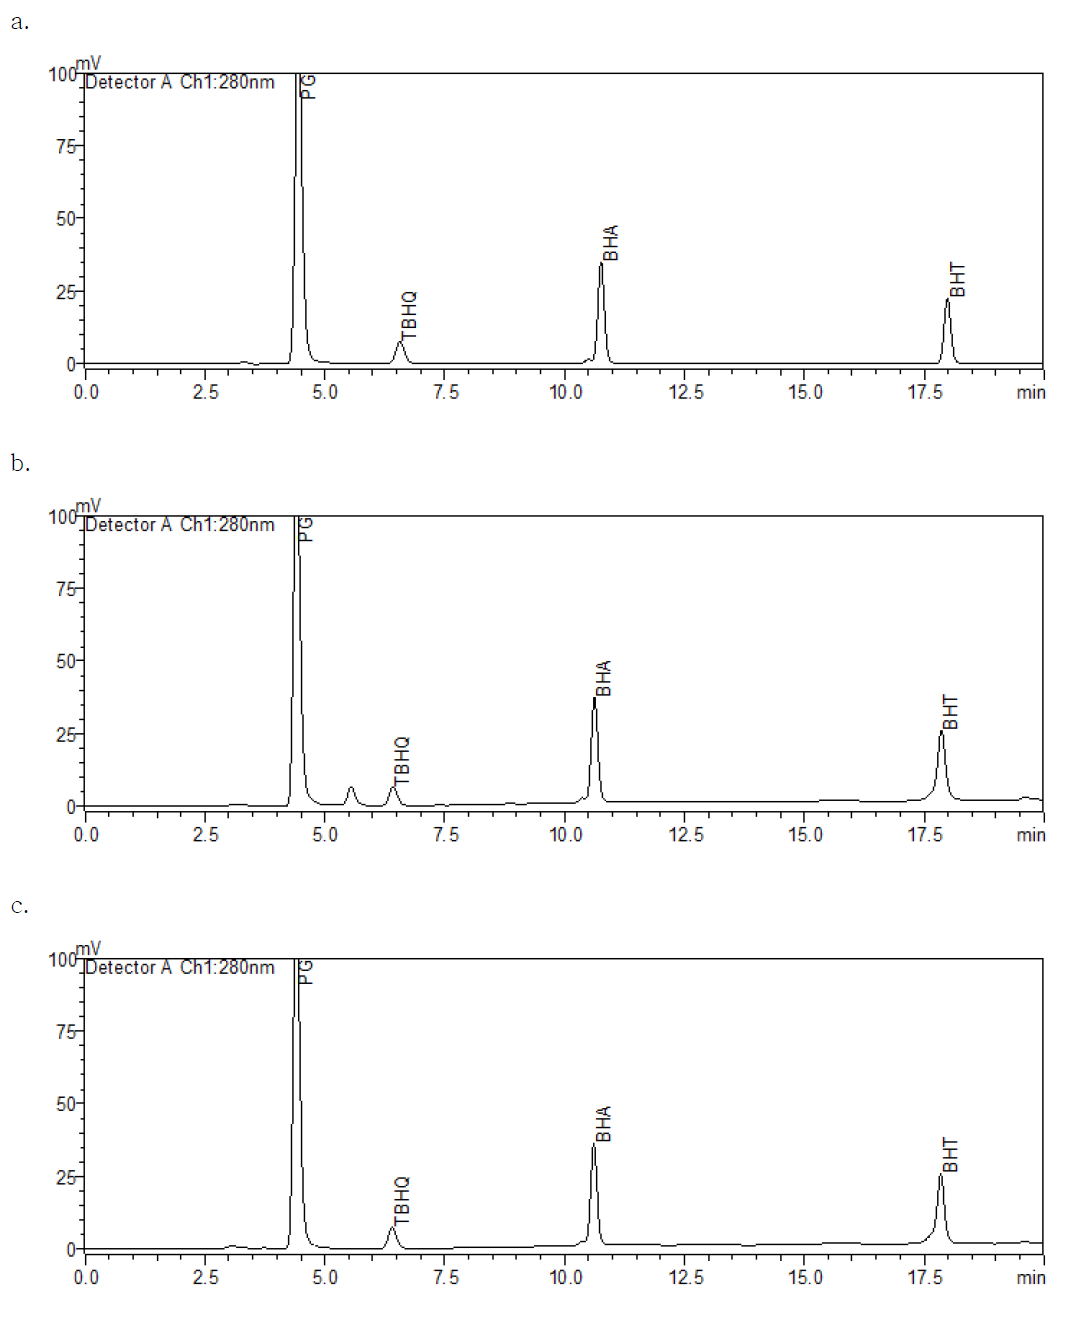 HPLC chromatograms of standard solution and livestock processed foods piked with four antioxidants(PG; propyl gallate, BHT; butylated hydroxy toluene, BHA; butylated hydroxy anisole, TBHQ; tert-butylhydroxyquinone)